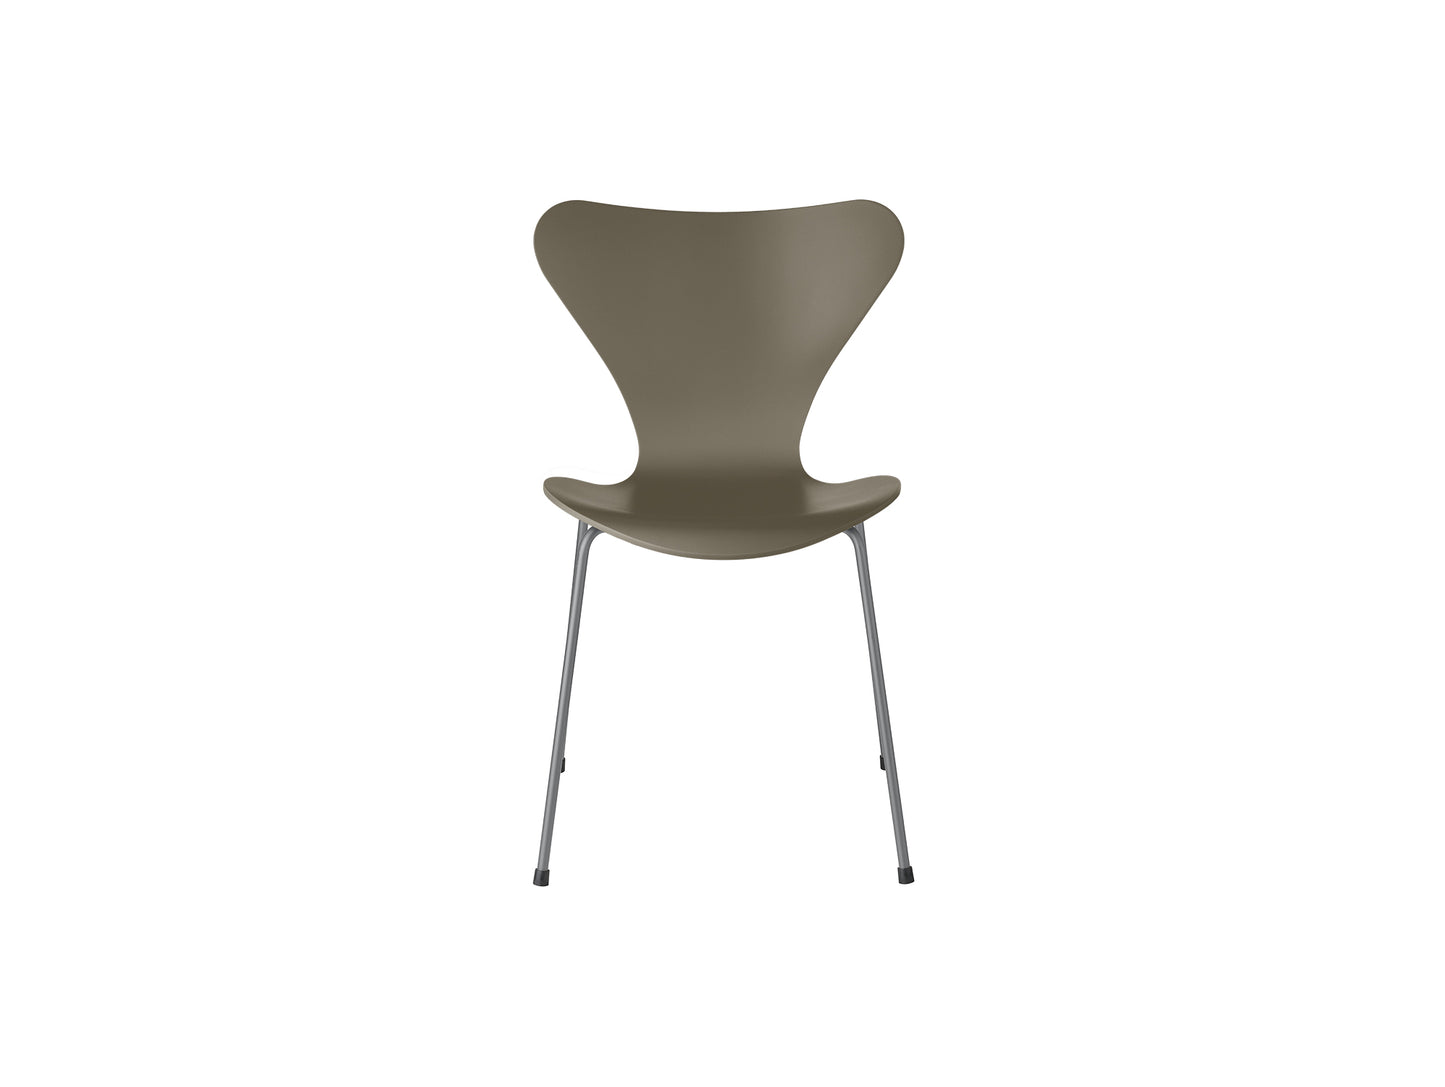 Series 7™ 3107 Dining Chair by Fritz Hansen - Olive Green Lacquered Veneer Shell / Silver Grey Steel